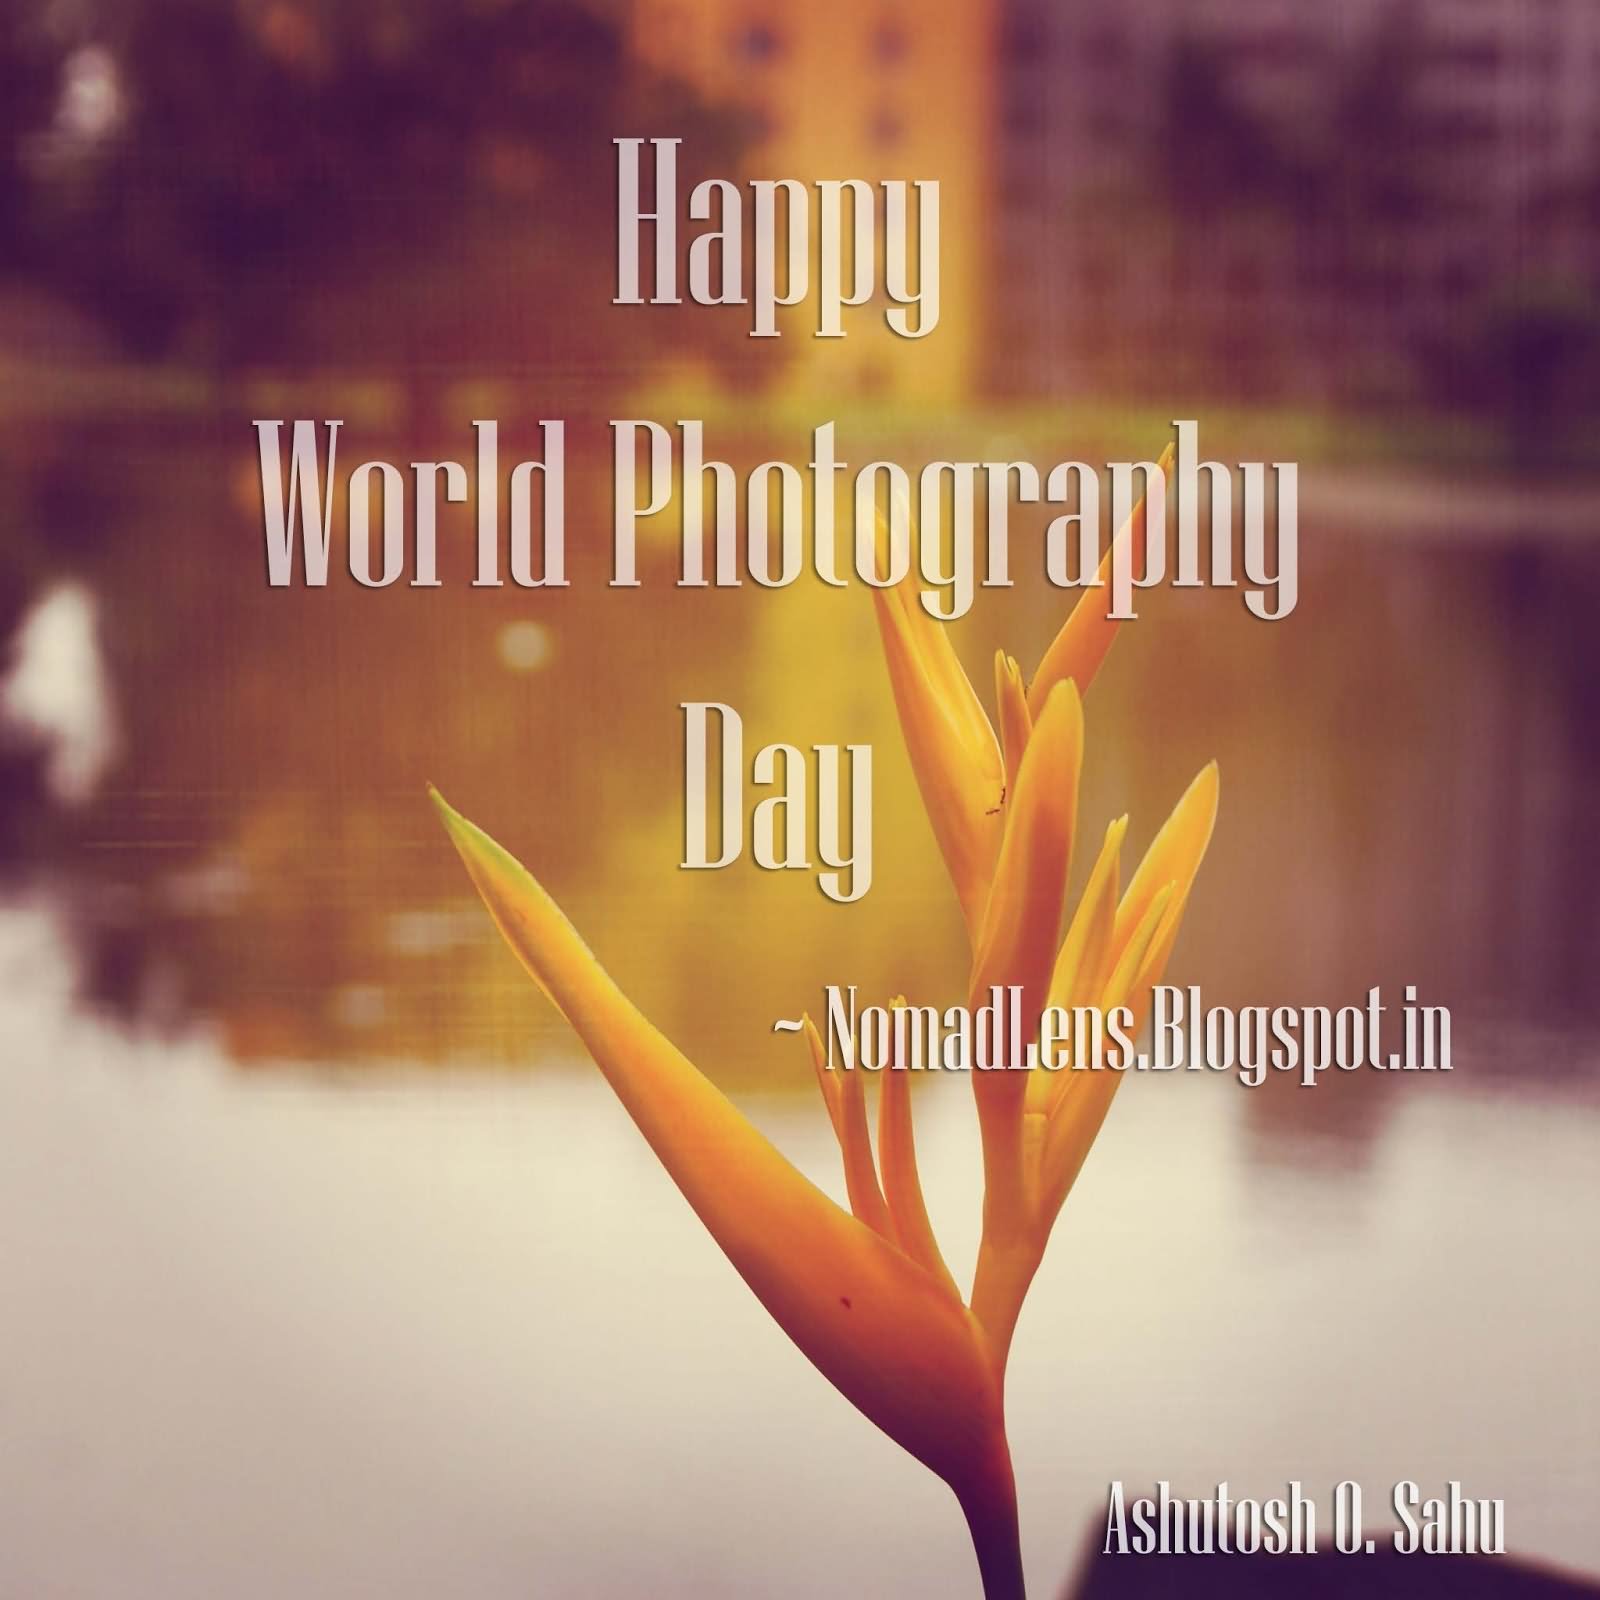 Happy World Photography Day 2016